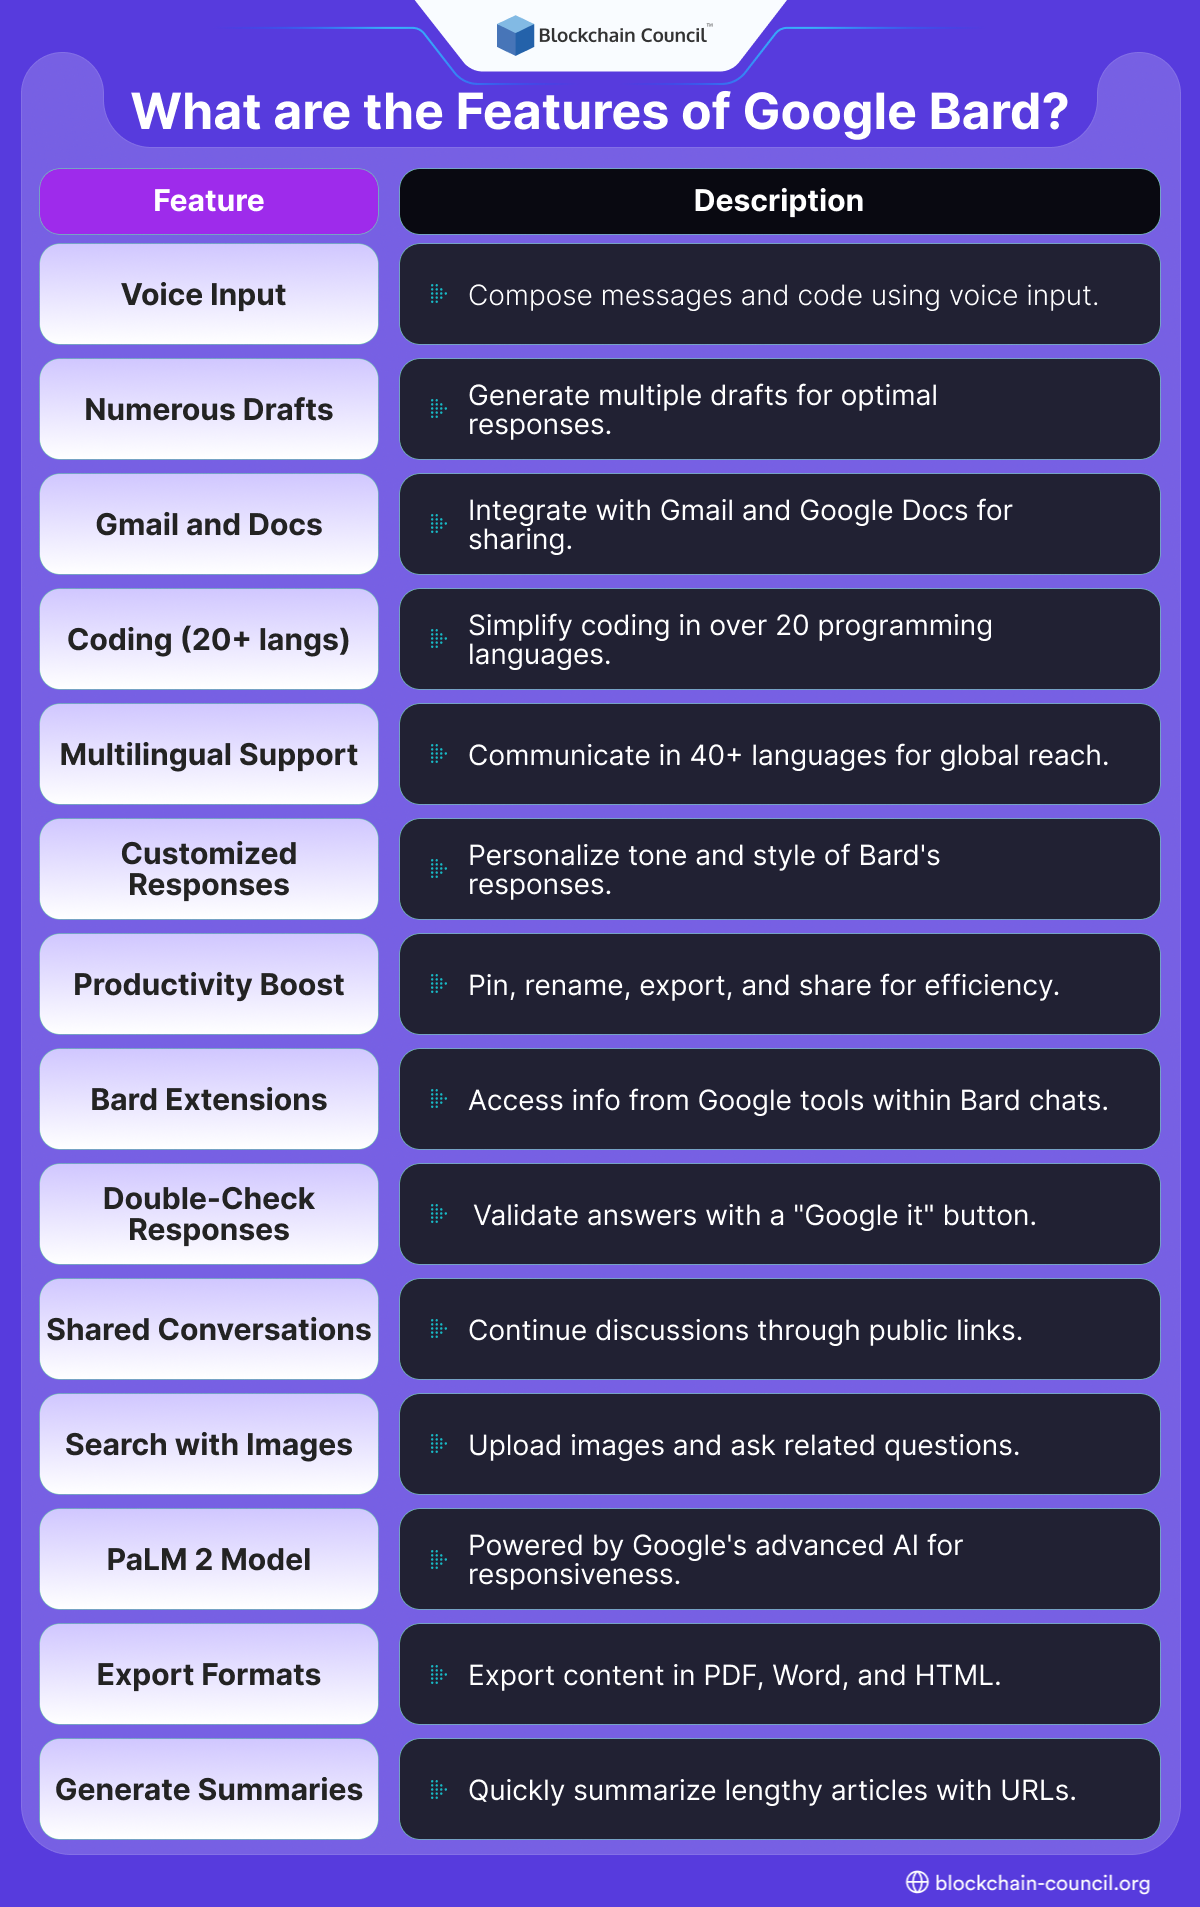 Features of Google Bard